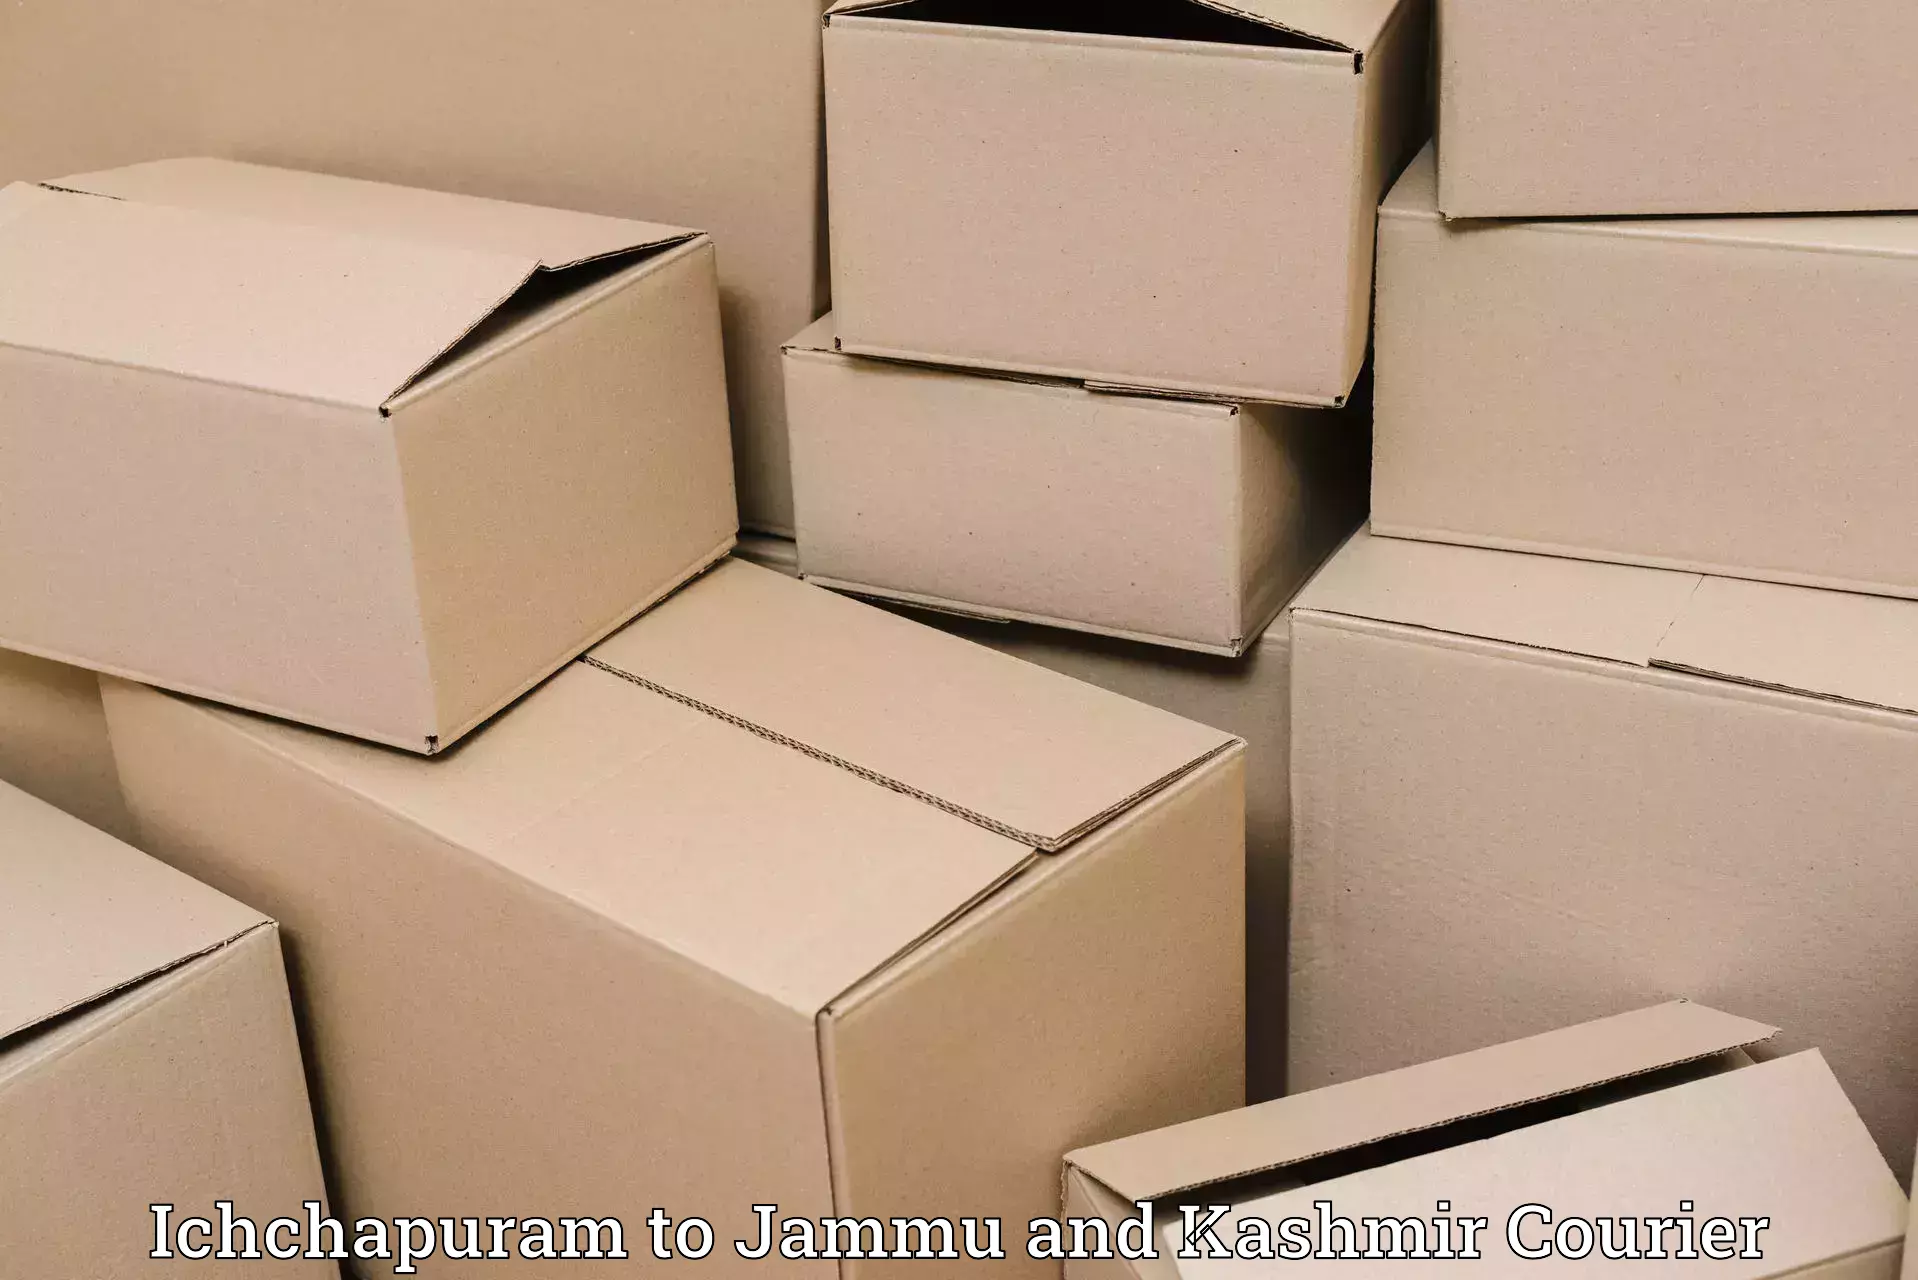 Affordable parcel rates in Ichchapuram to Pulwama